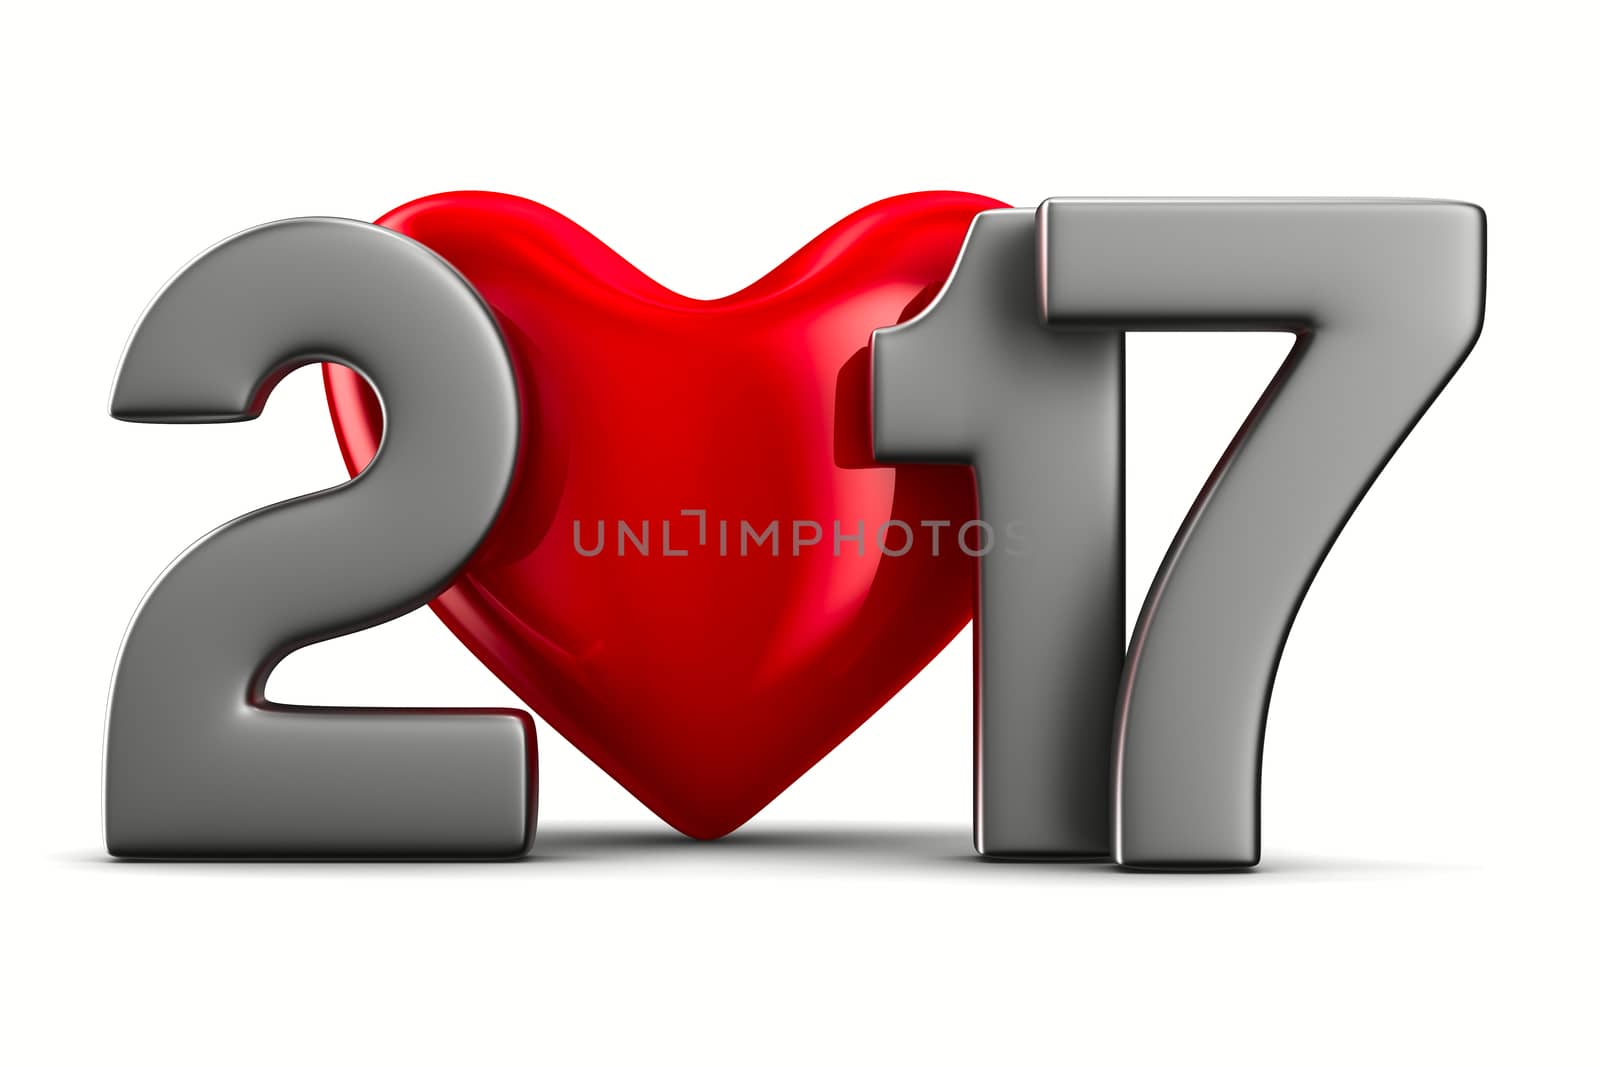 2017 new year. Isolated 3D image